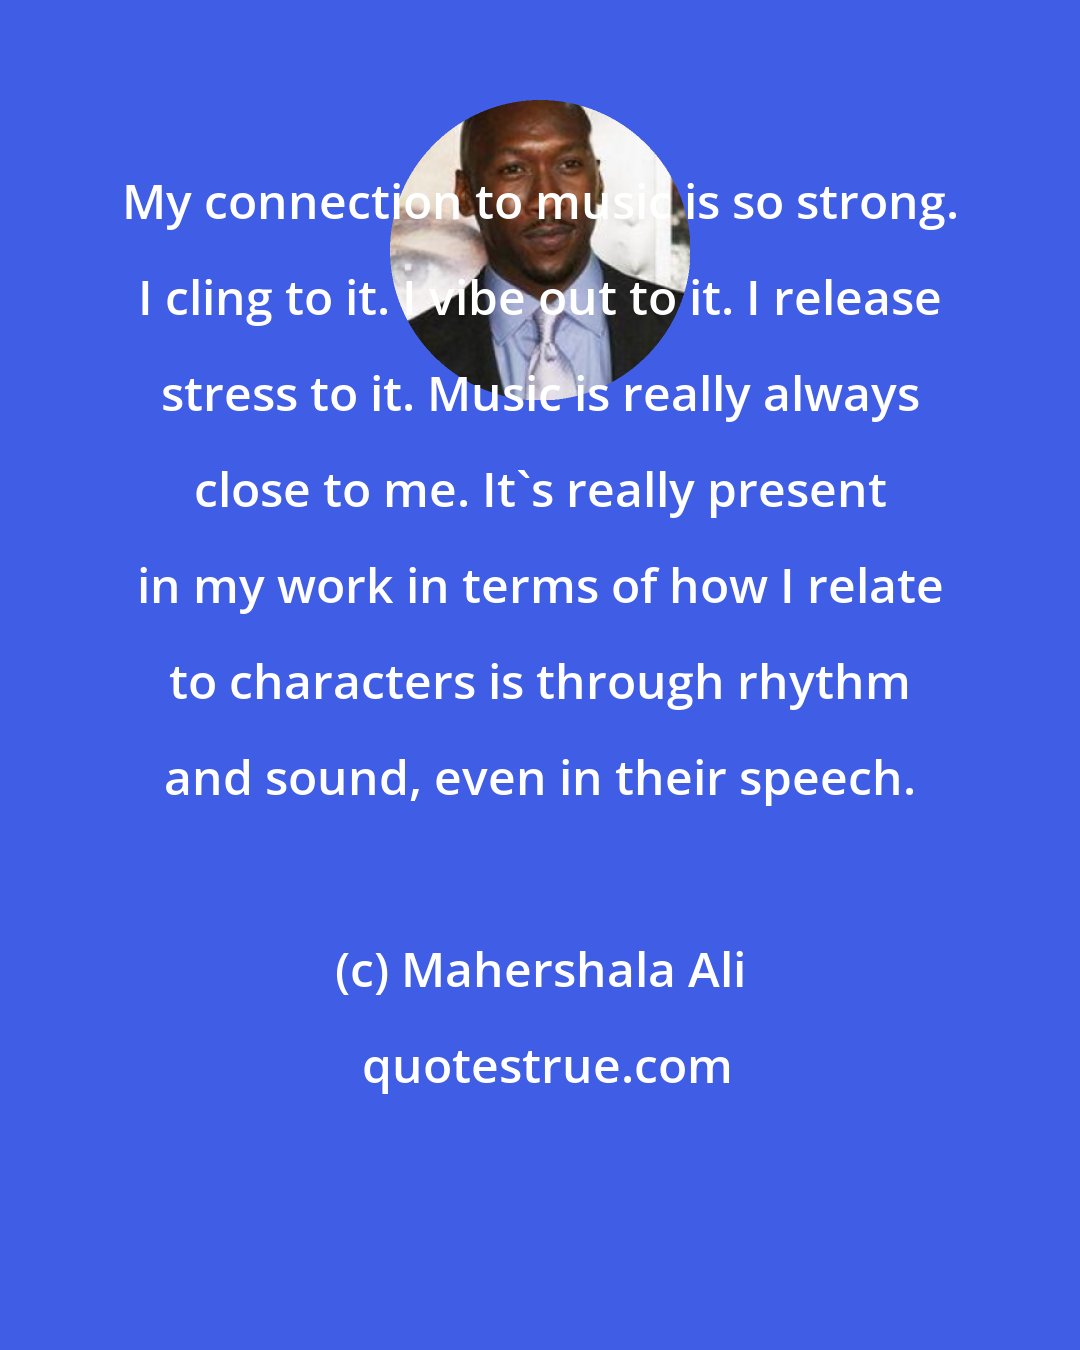 Mahershala Ali: My connection to music is so strong. I cling to it. I vibe out to it. I release stress to it. Music is really always close to me. It's really present in my work in terms of how I relate to characters is through rhythm and sound, even in their speech.